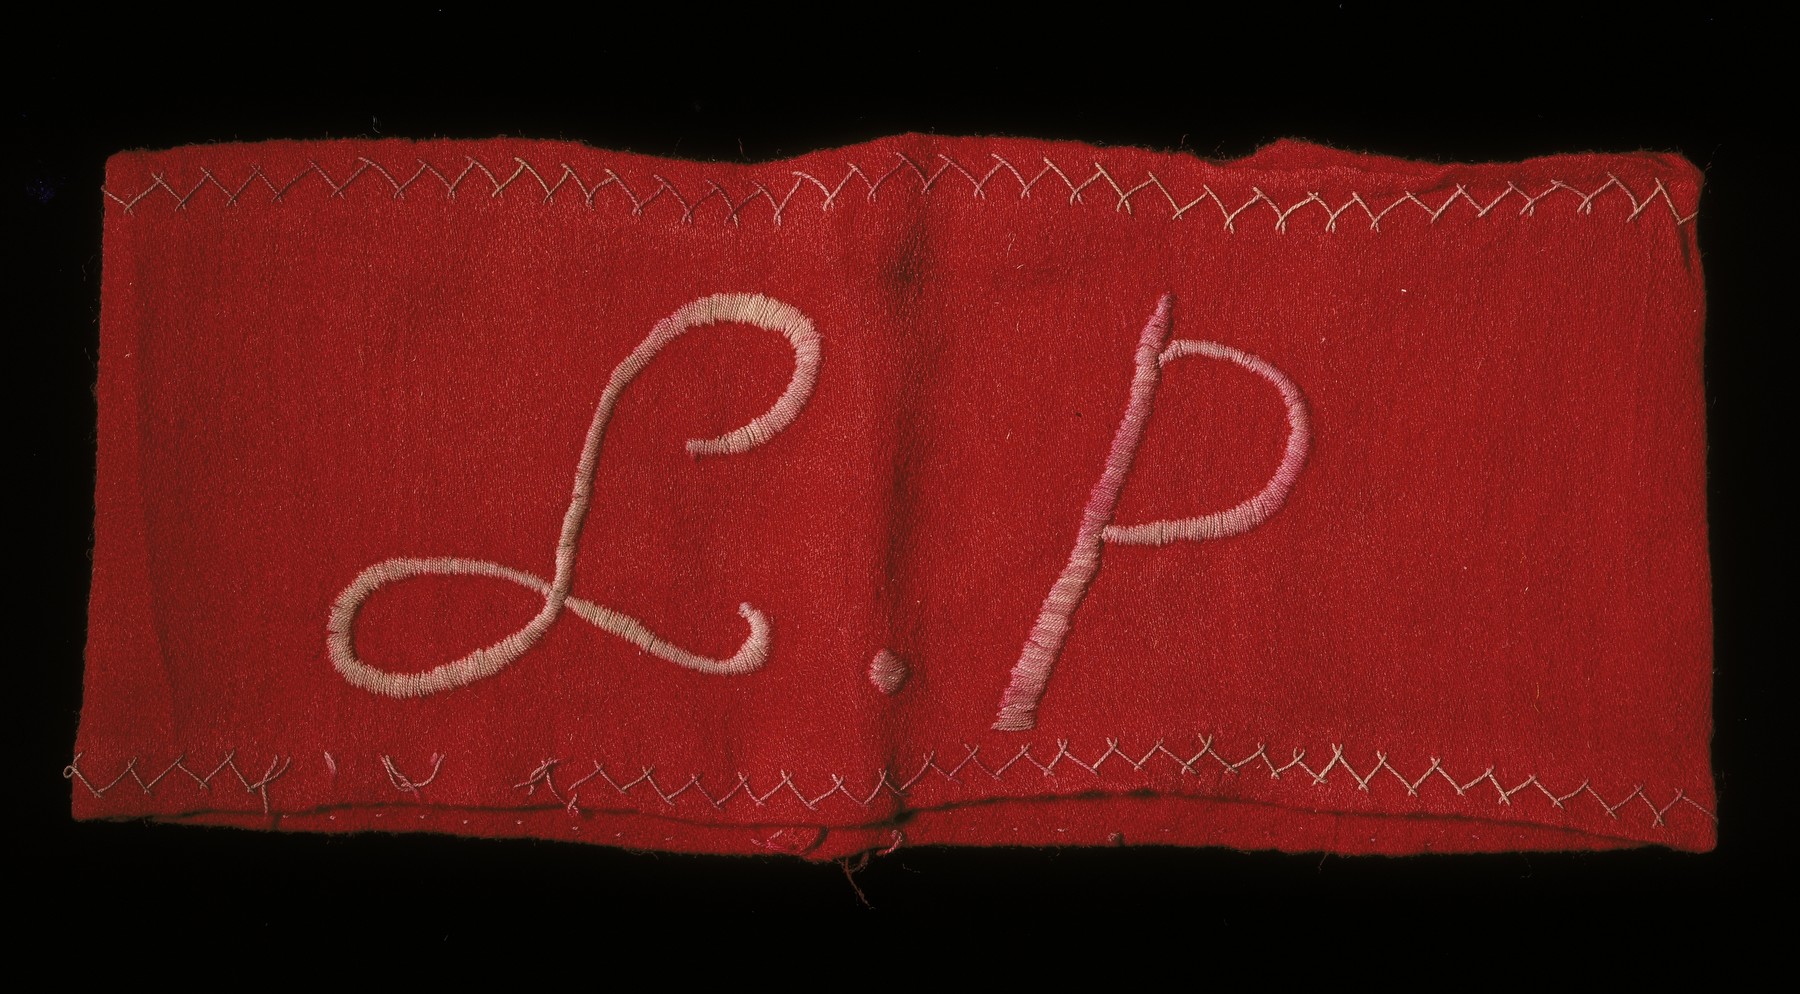 An armband stitched with the initials "L.P." Lager Polizei (camp police).